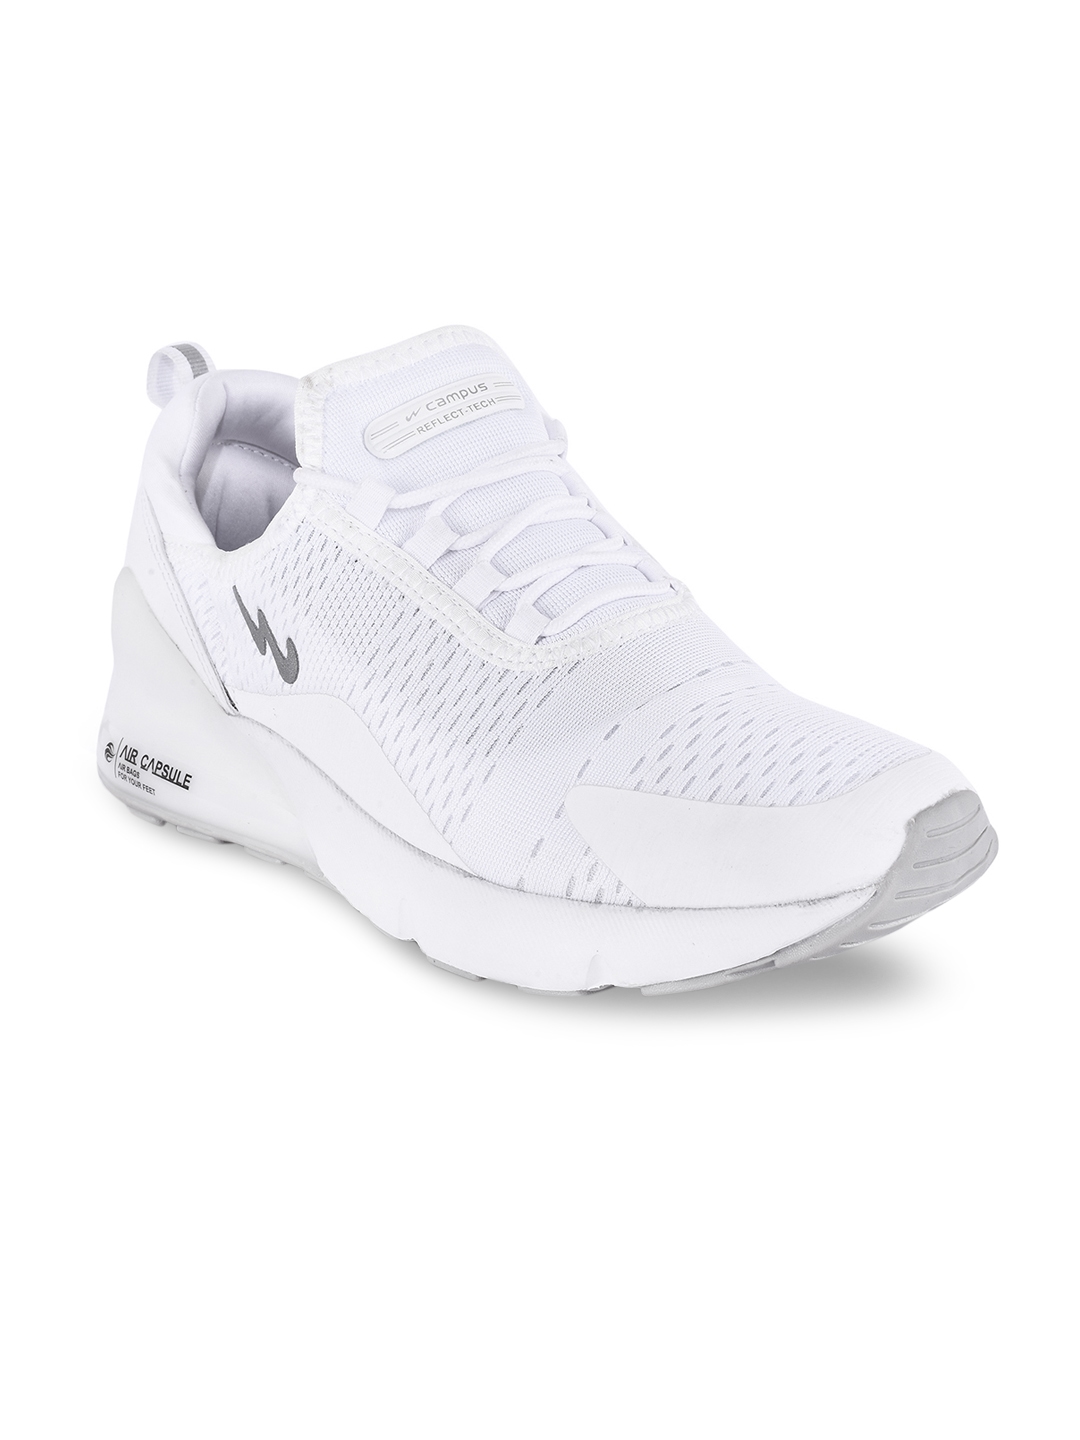 campus sports running shoes